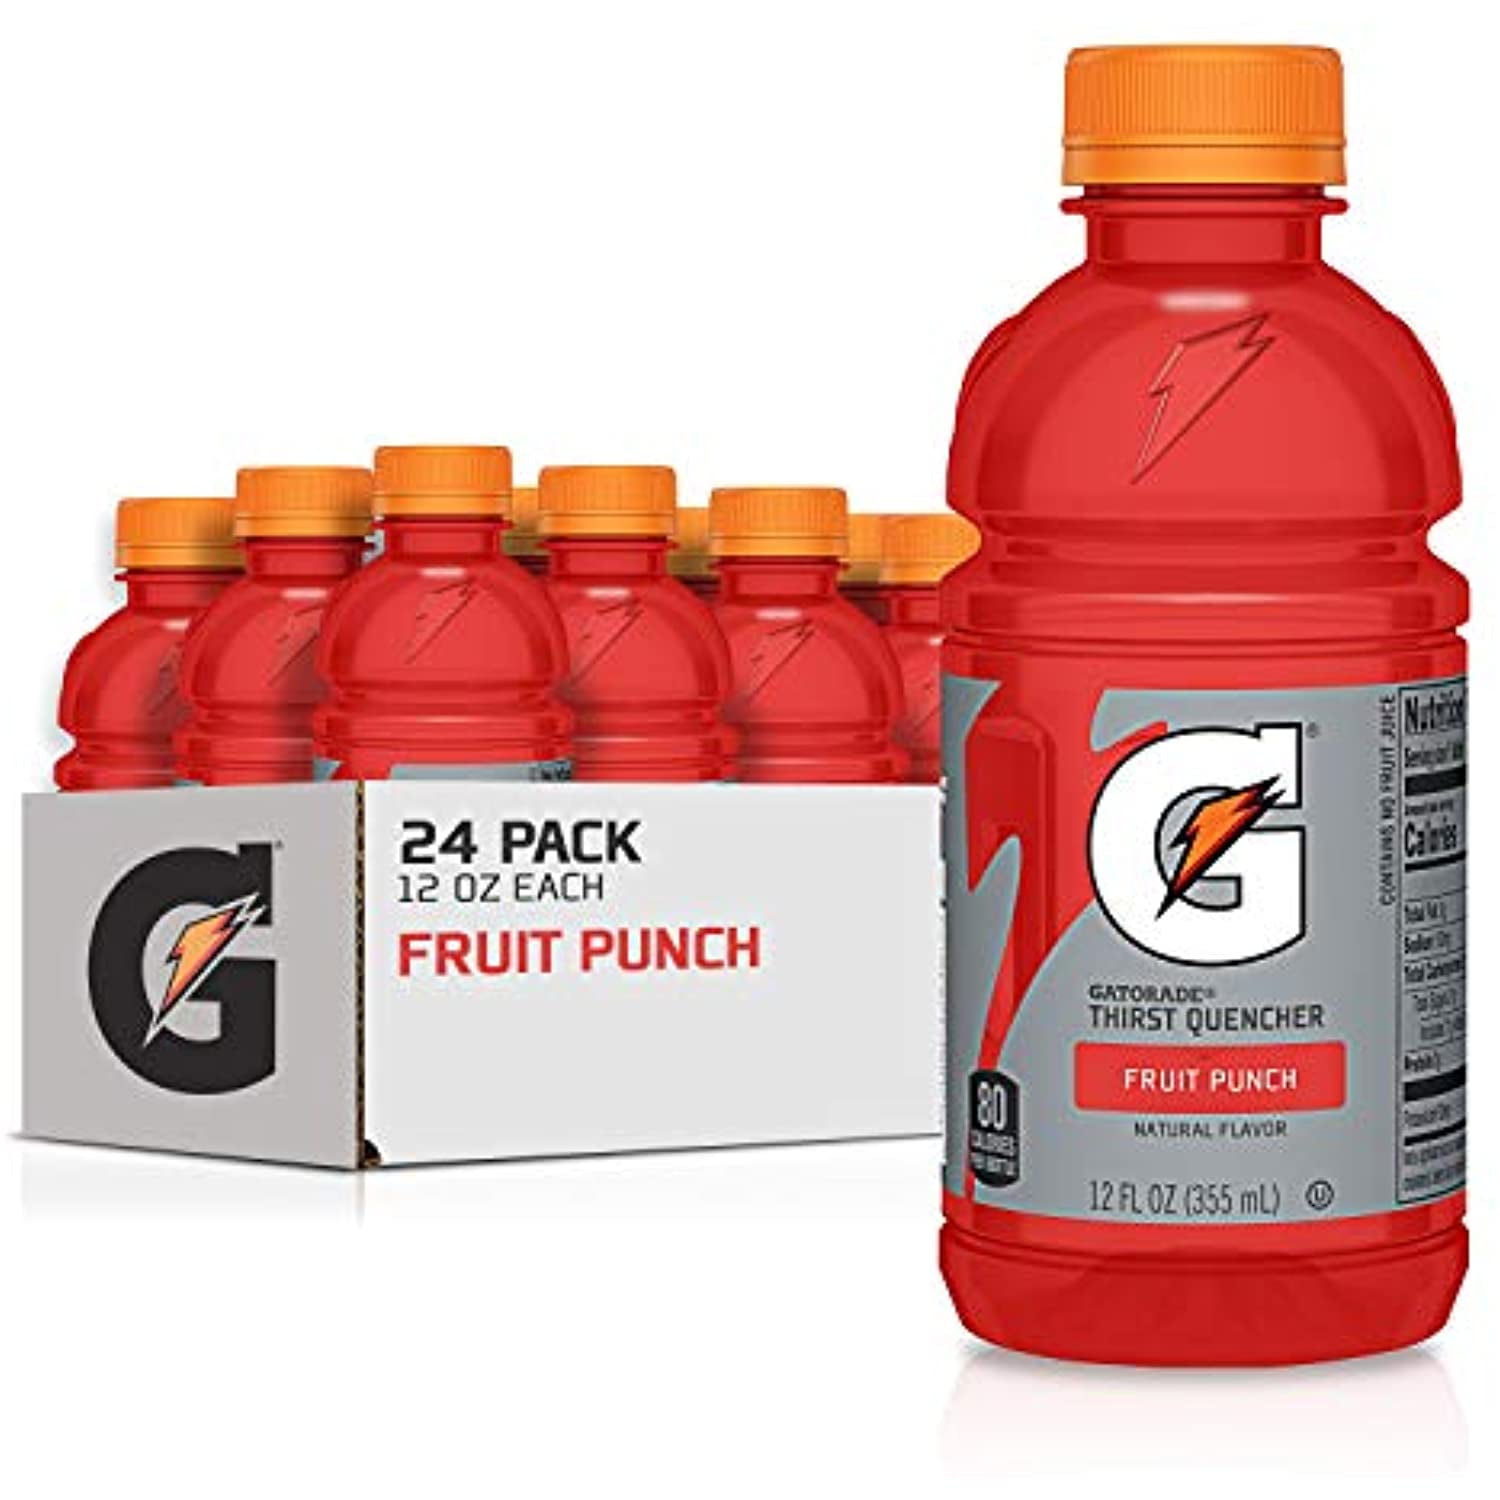 Gatorade 20 Oz. Fruit Punch Wide Mouth Thirst Quencher Drink (24-Pack) -  Deer Park, NY - The Barn Pet Feed & Supplies